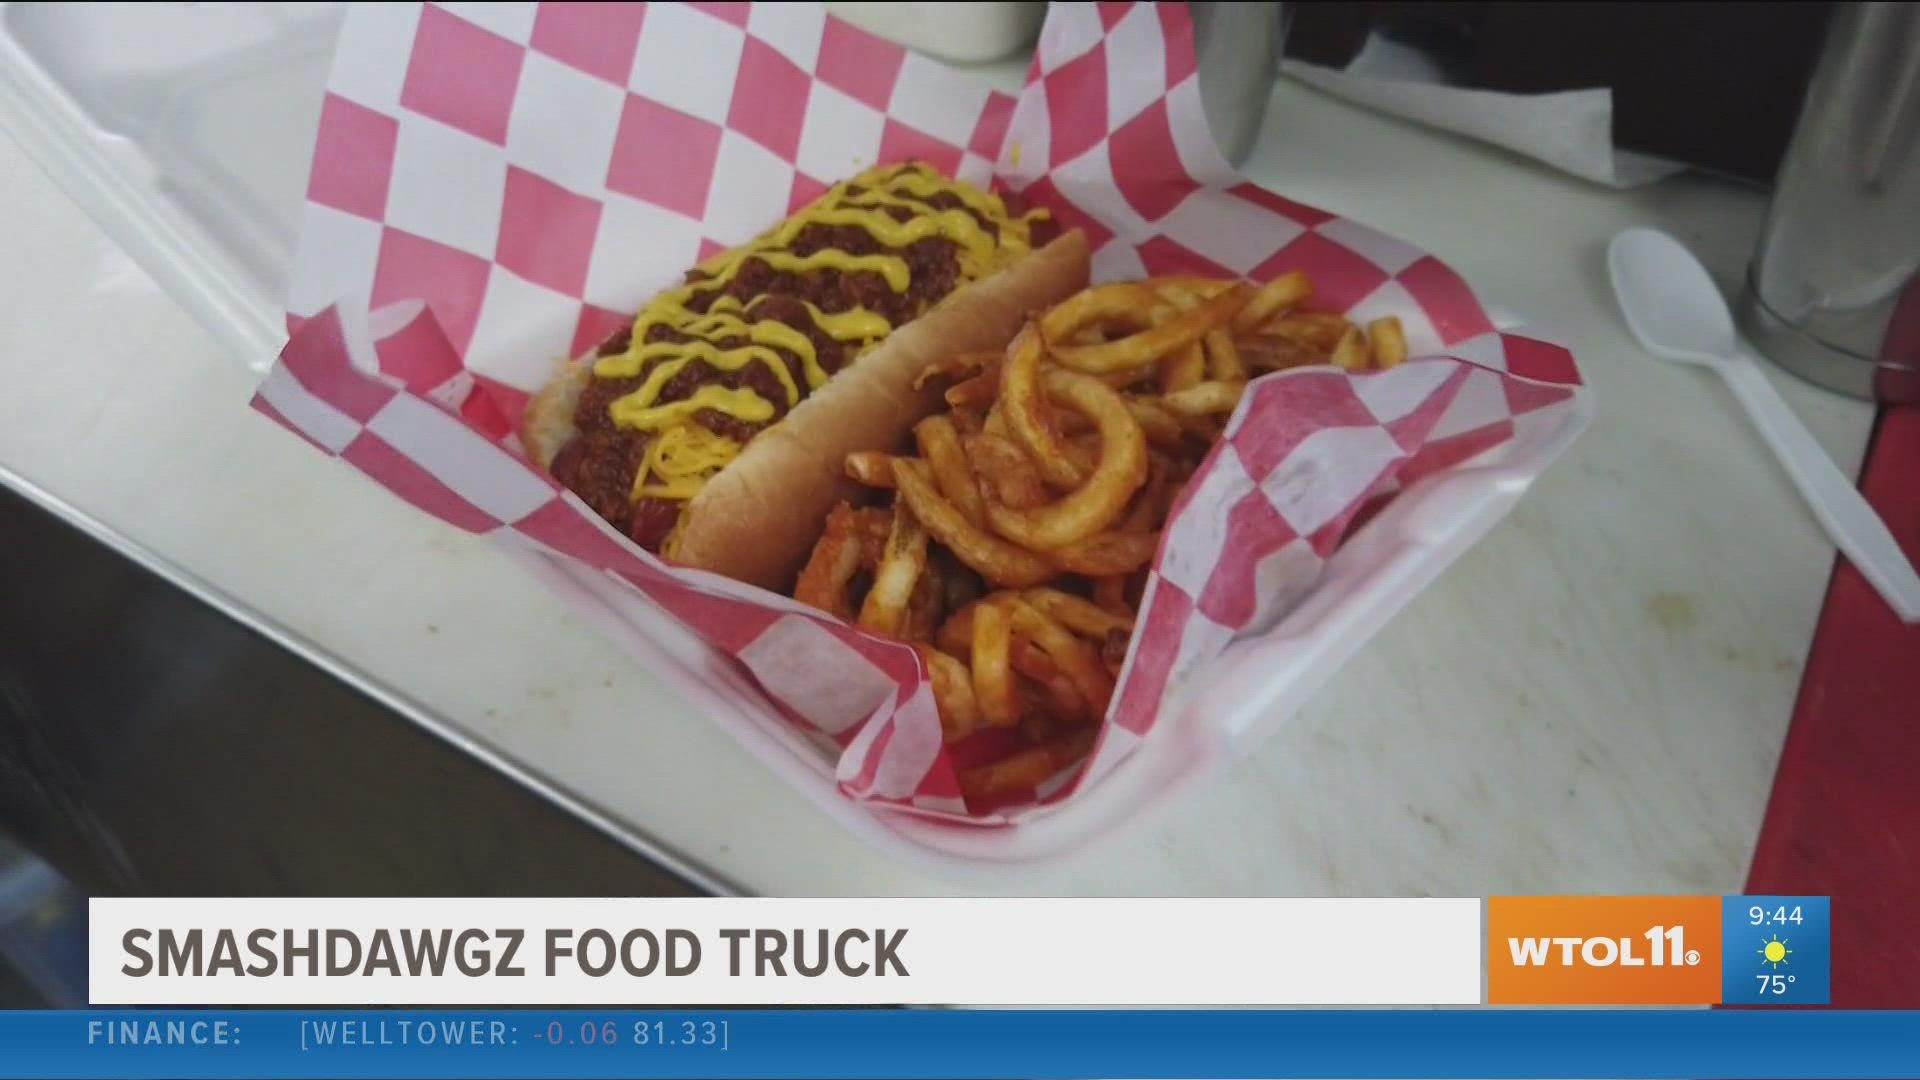 Smashdawgz won best food truck from the Toledo City Paper in 2018, its first year of operation.